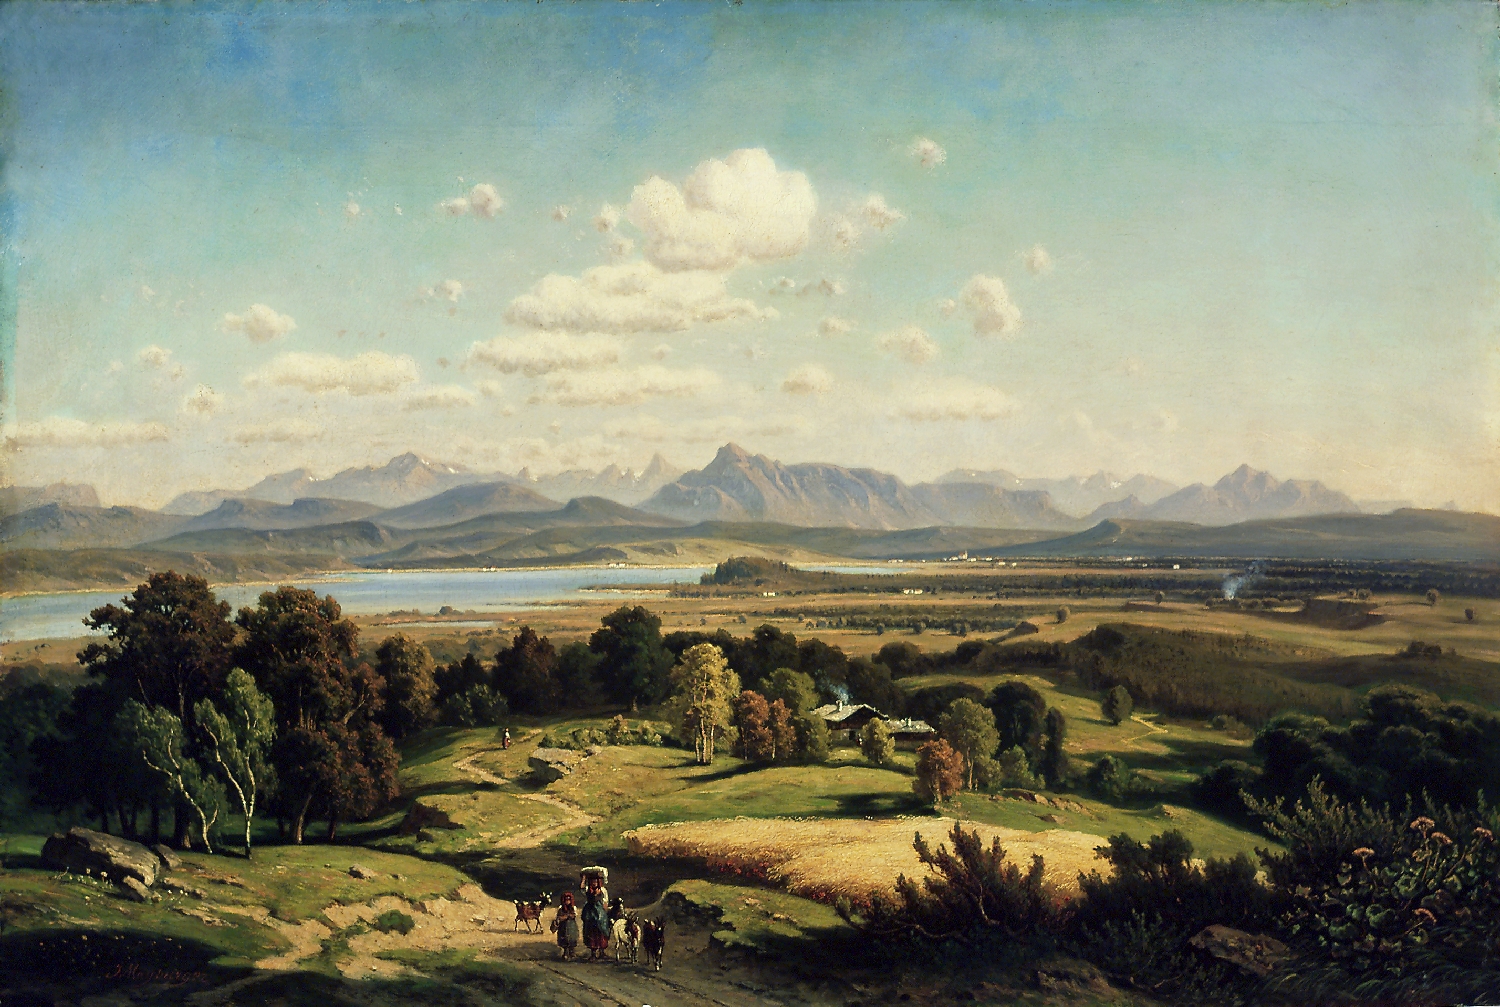 View from Tannberg over Wallersee towards the south, Josef Mayburger, 1870, inv. no. 169-50